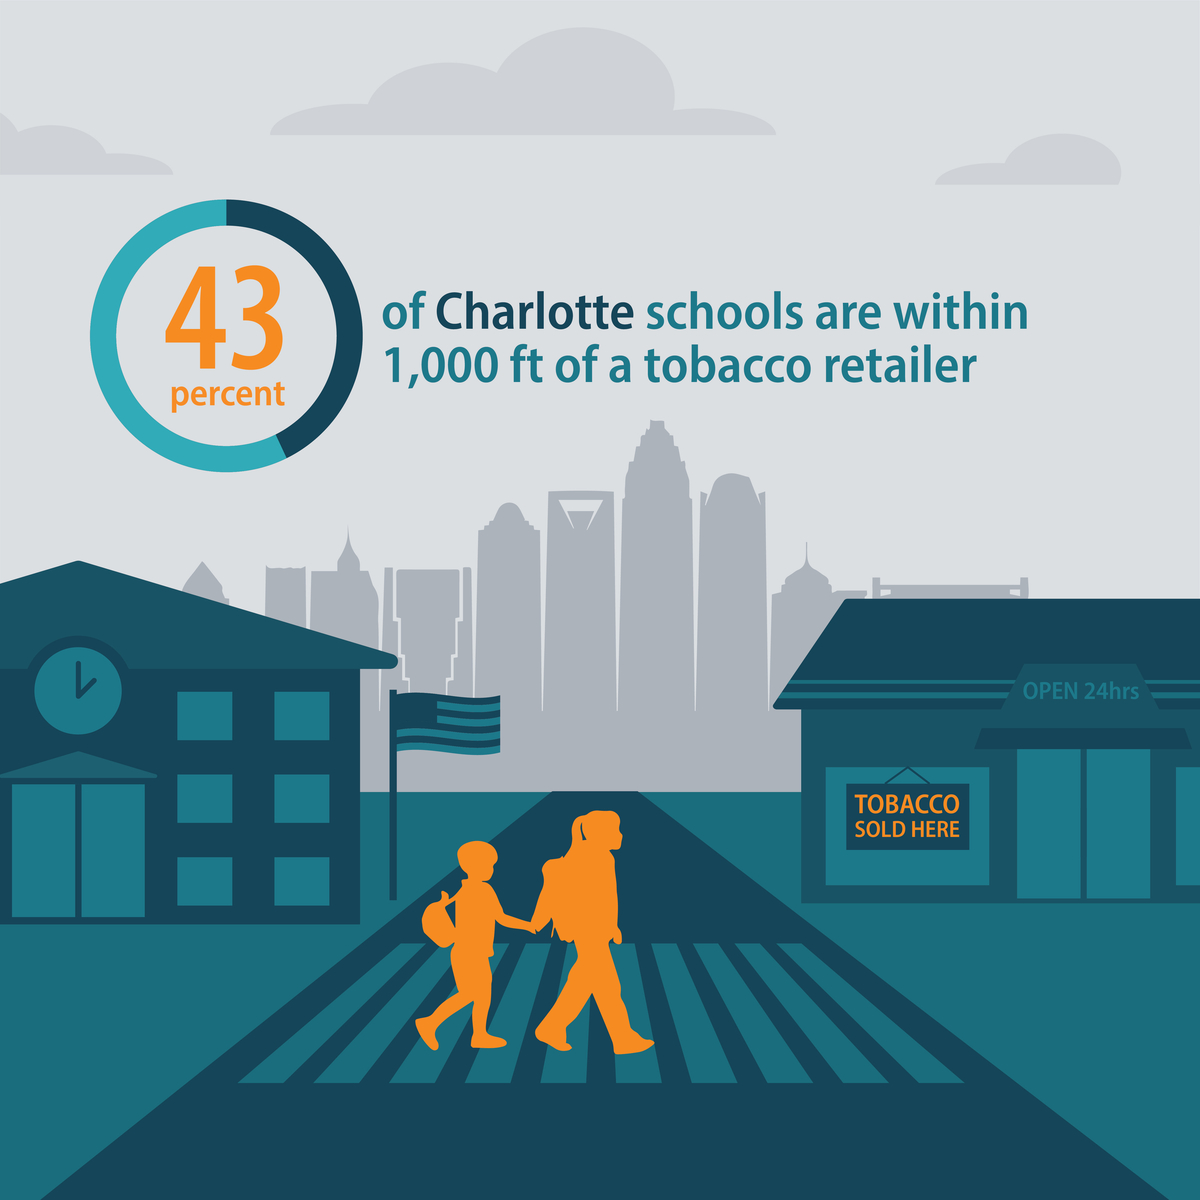 43 percent of Charlotte schools are within 1,000 feet of a tobacco retailer